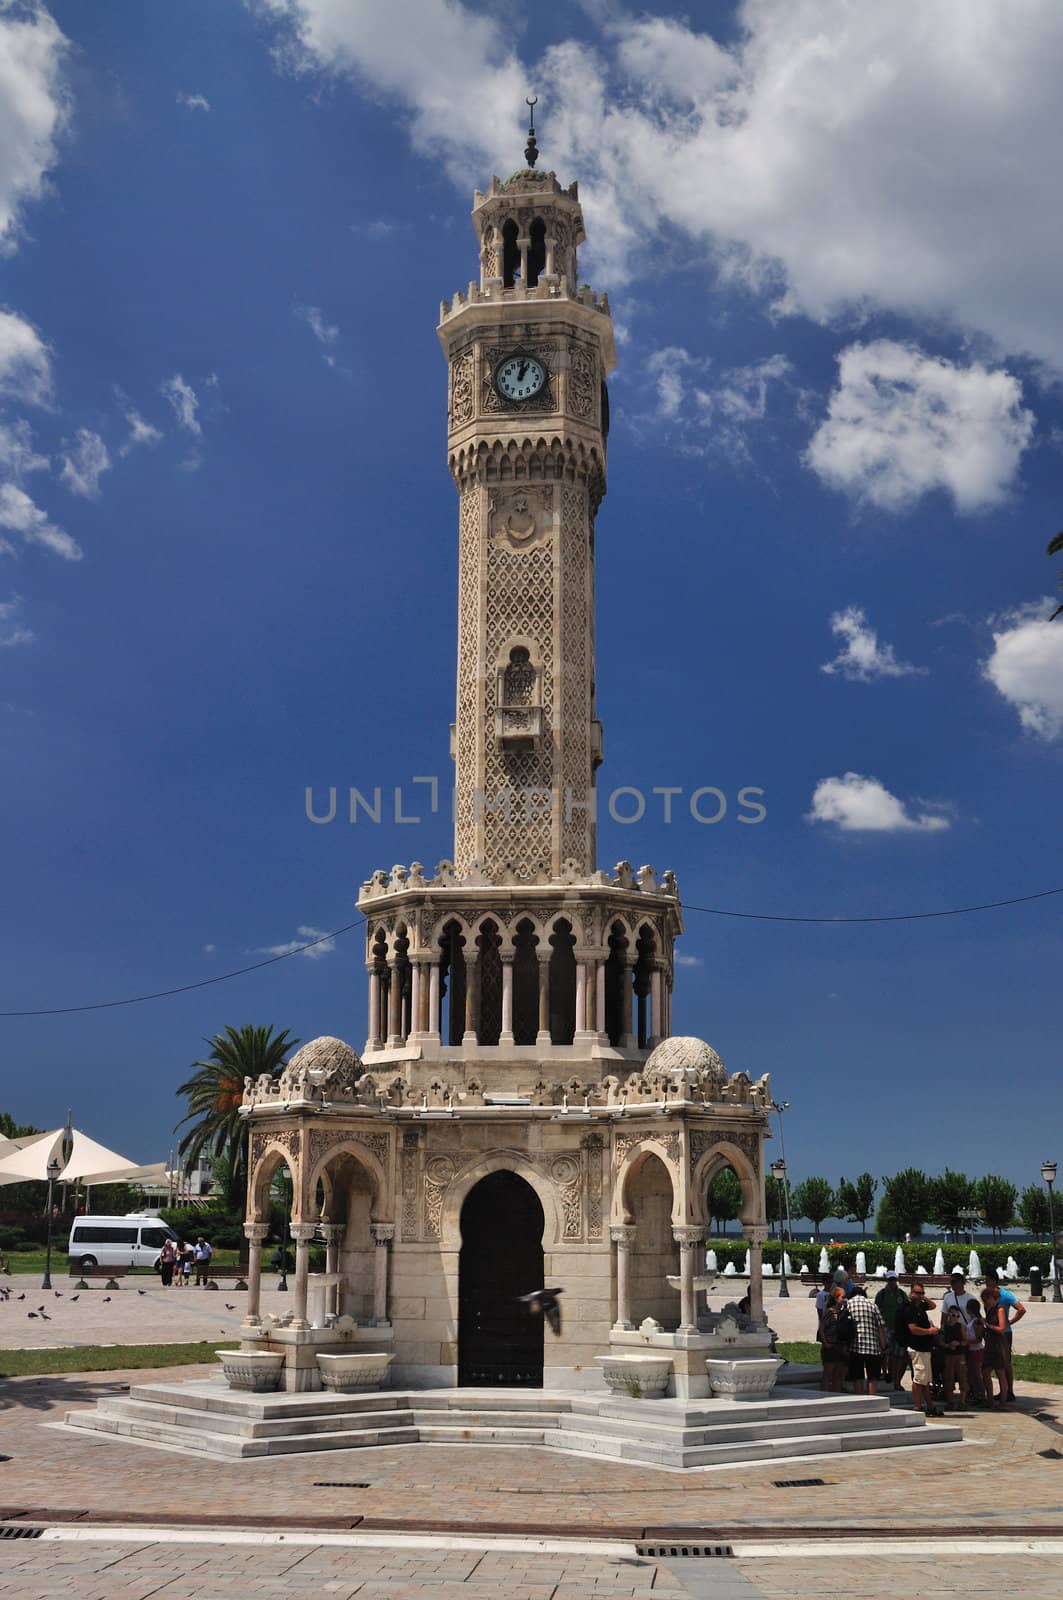 Historical Clock Tower of Izmir, Turkey. It was built in 1901, at Konak Square and accepted as the symbol of Izmir City.